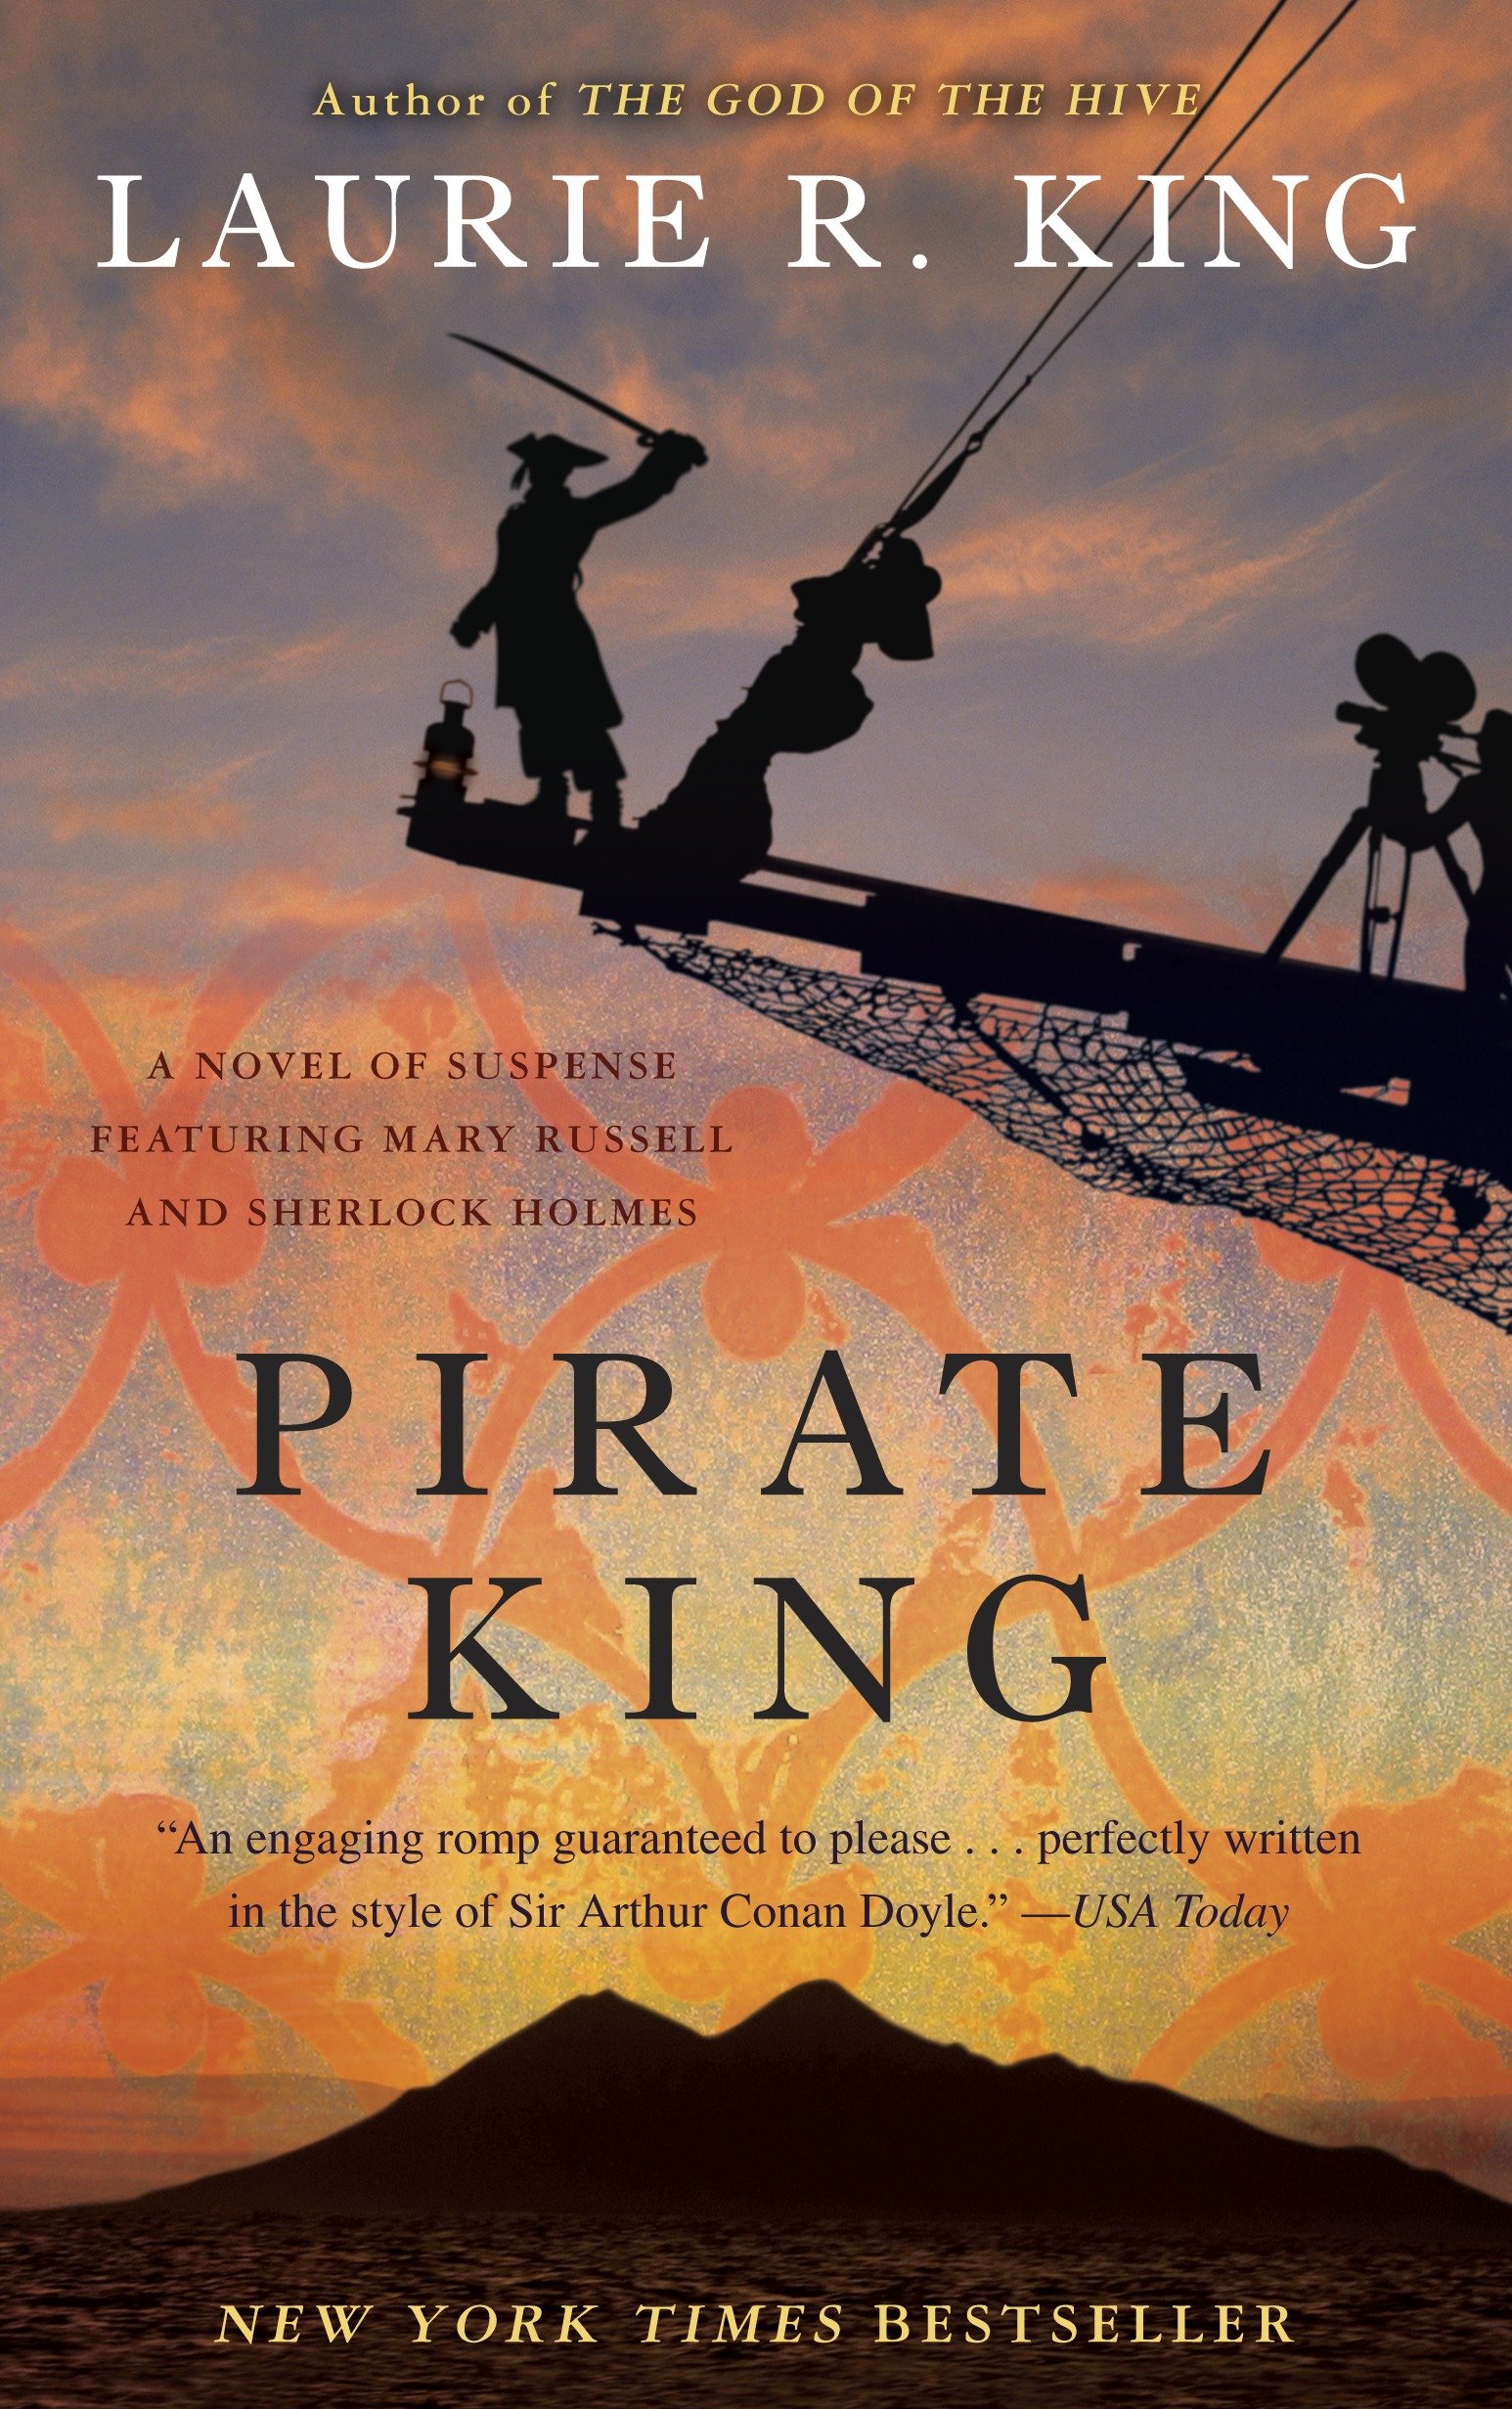 Pirate king a novel of suspense featuring Mary Russell and Sherlock Holmes cover image